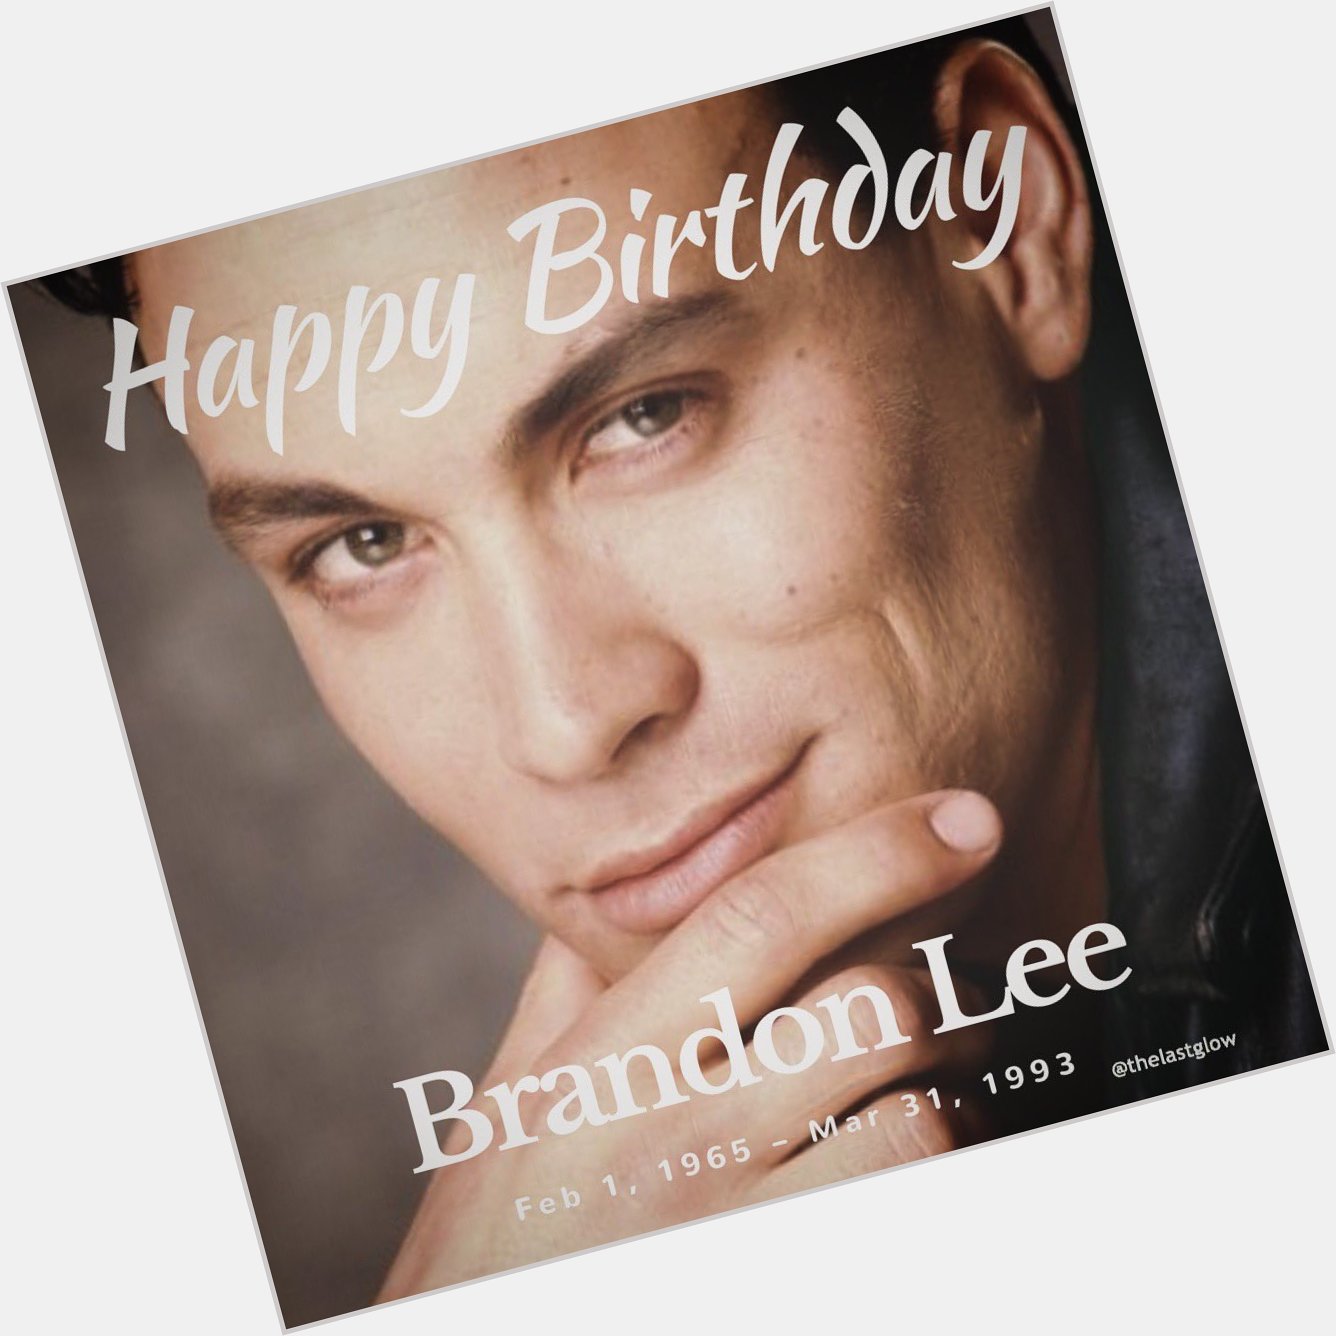 Happy Birthday Brandon Lee. 

On Feb 1, 2017 he would have been 52.  